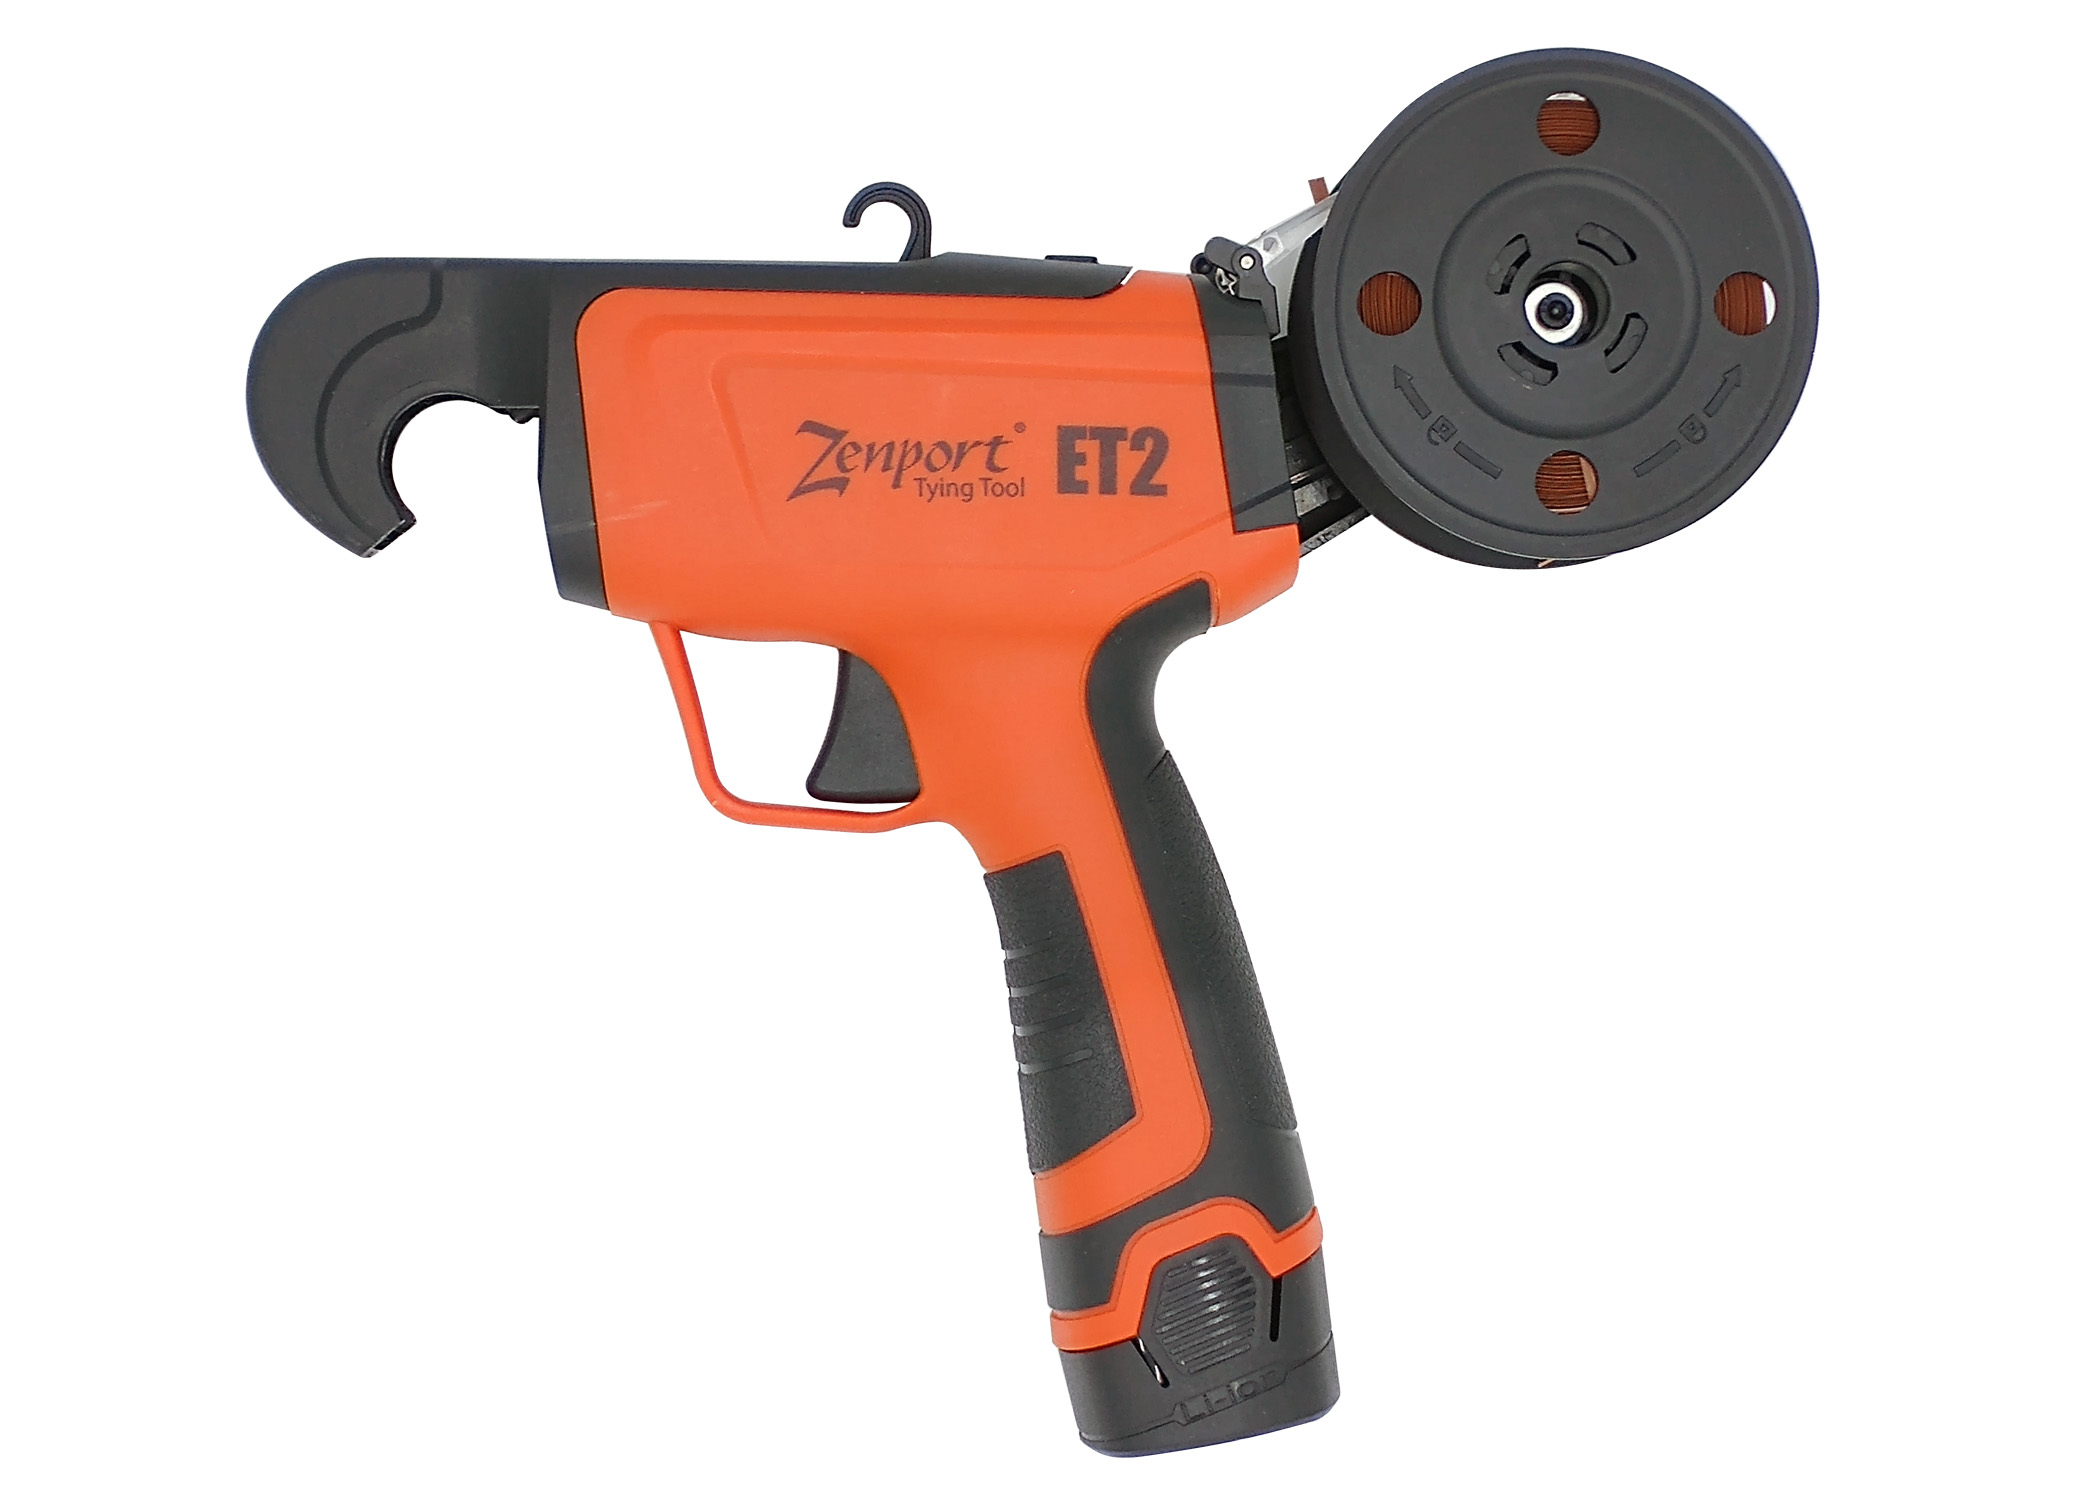 Zenport ET2 Cordless Electric Plant Tying Tool, Battery Powered, Hand-Held, Twist Tie Machine, FREE SHIPPING